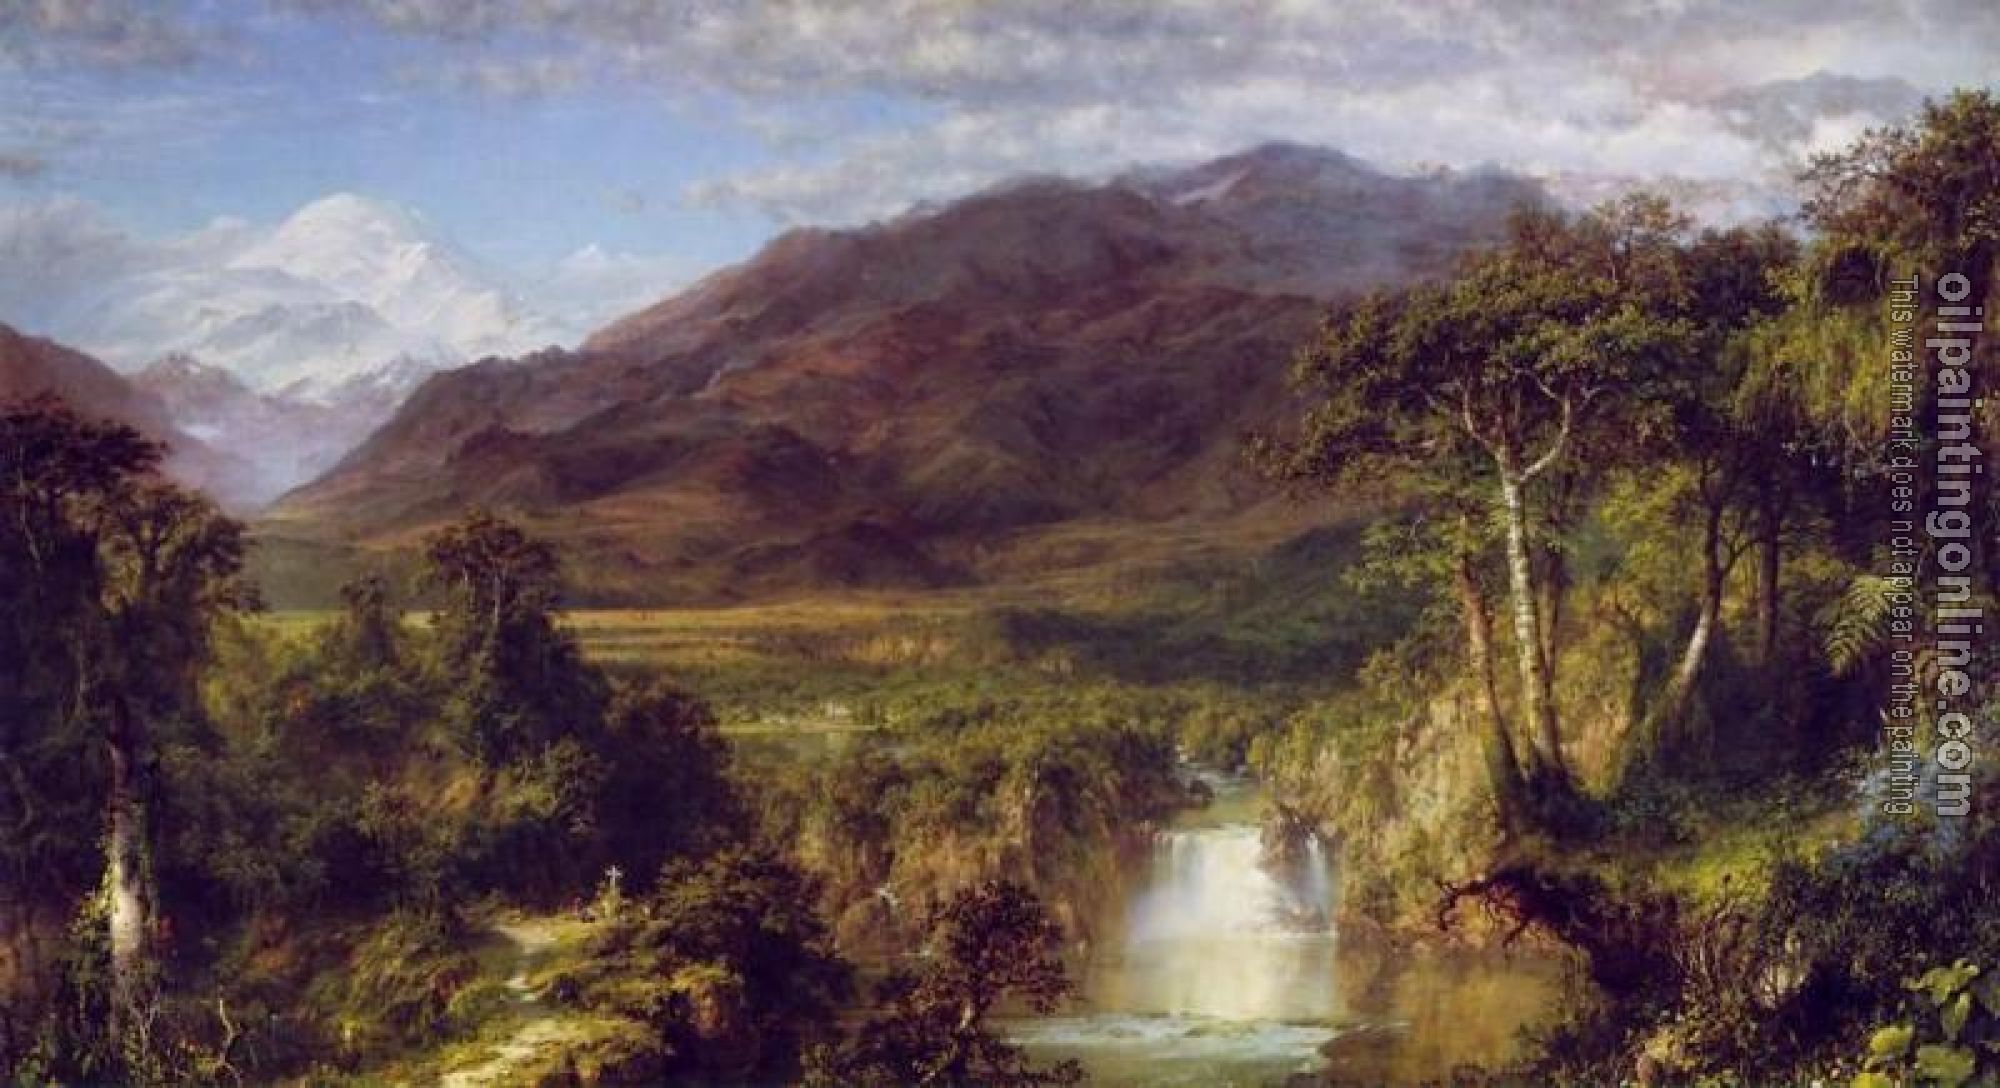 Frederic Edwin Church - Heart of the Andes